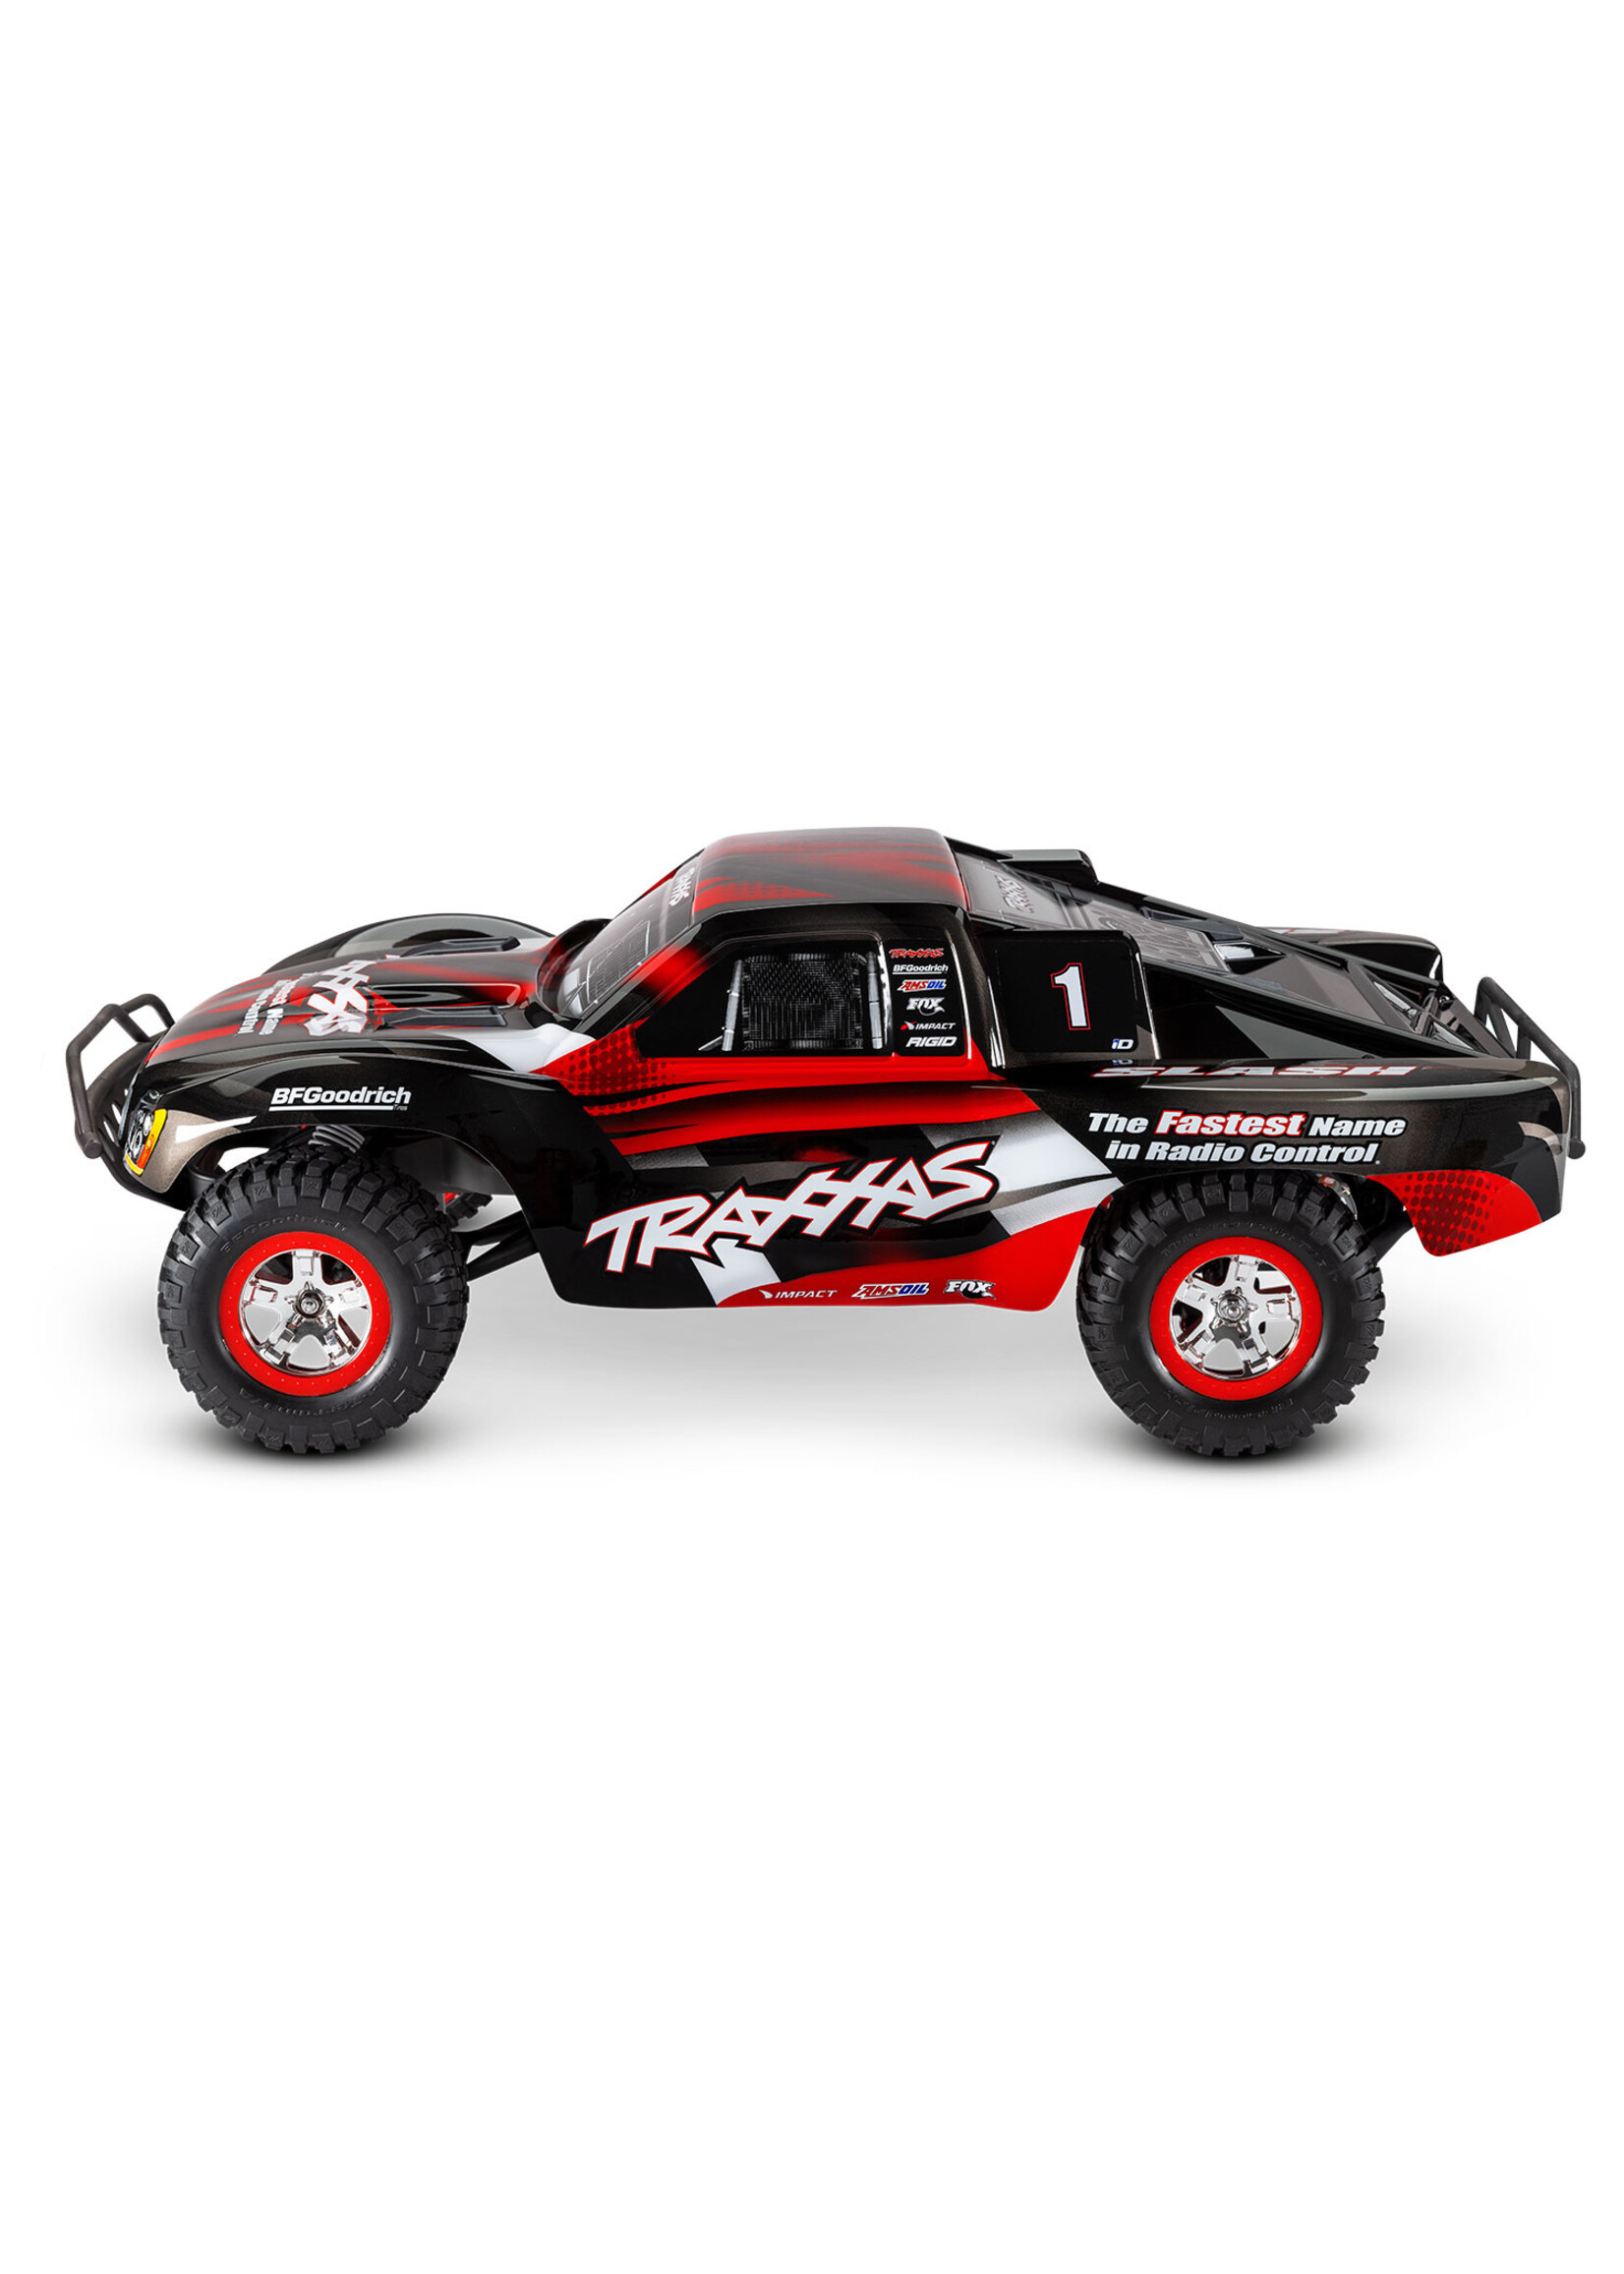 Traxxas 1/10 Slash Short Course Truck With USB-C Charger - Red